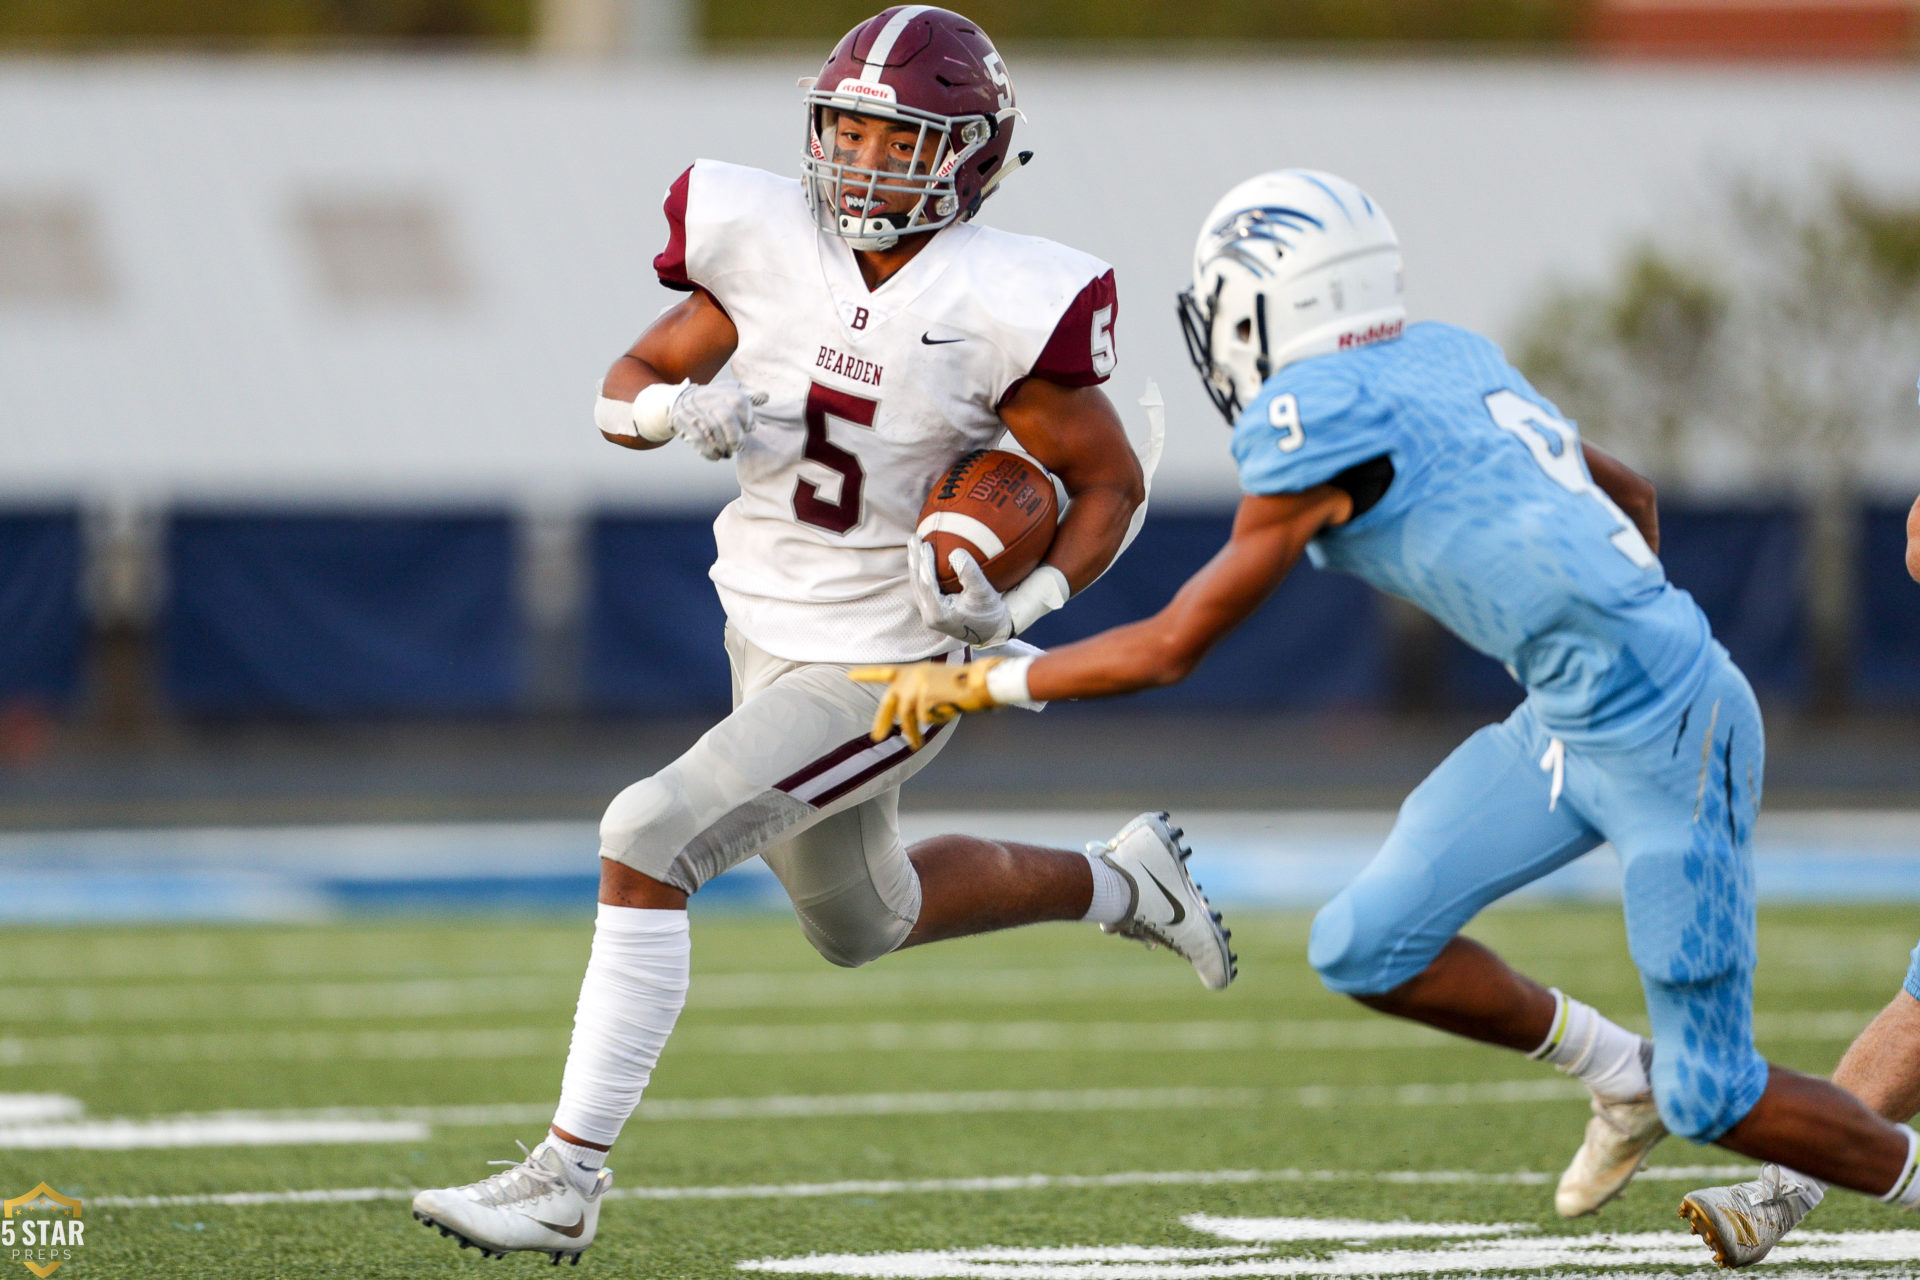 Bearden Football picks up first win of the season, 3428, over rival